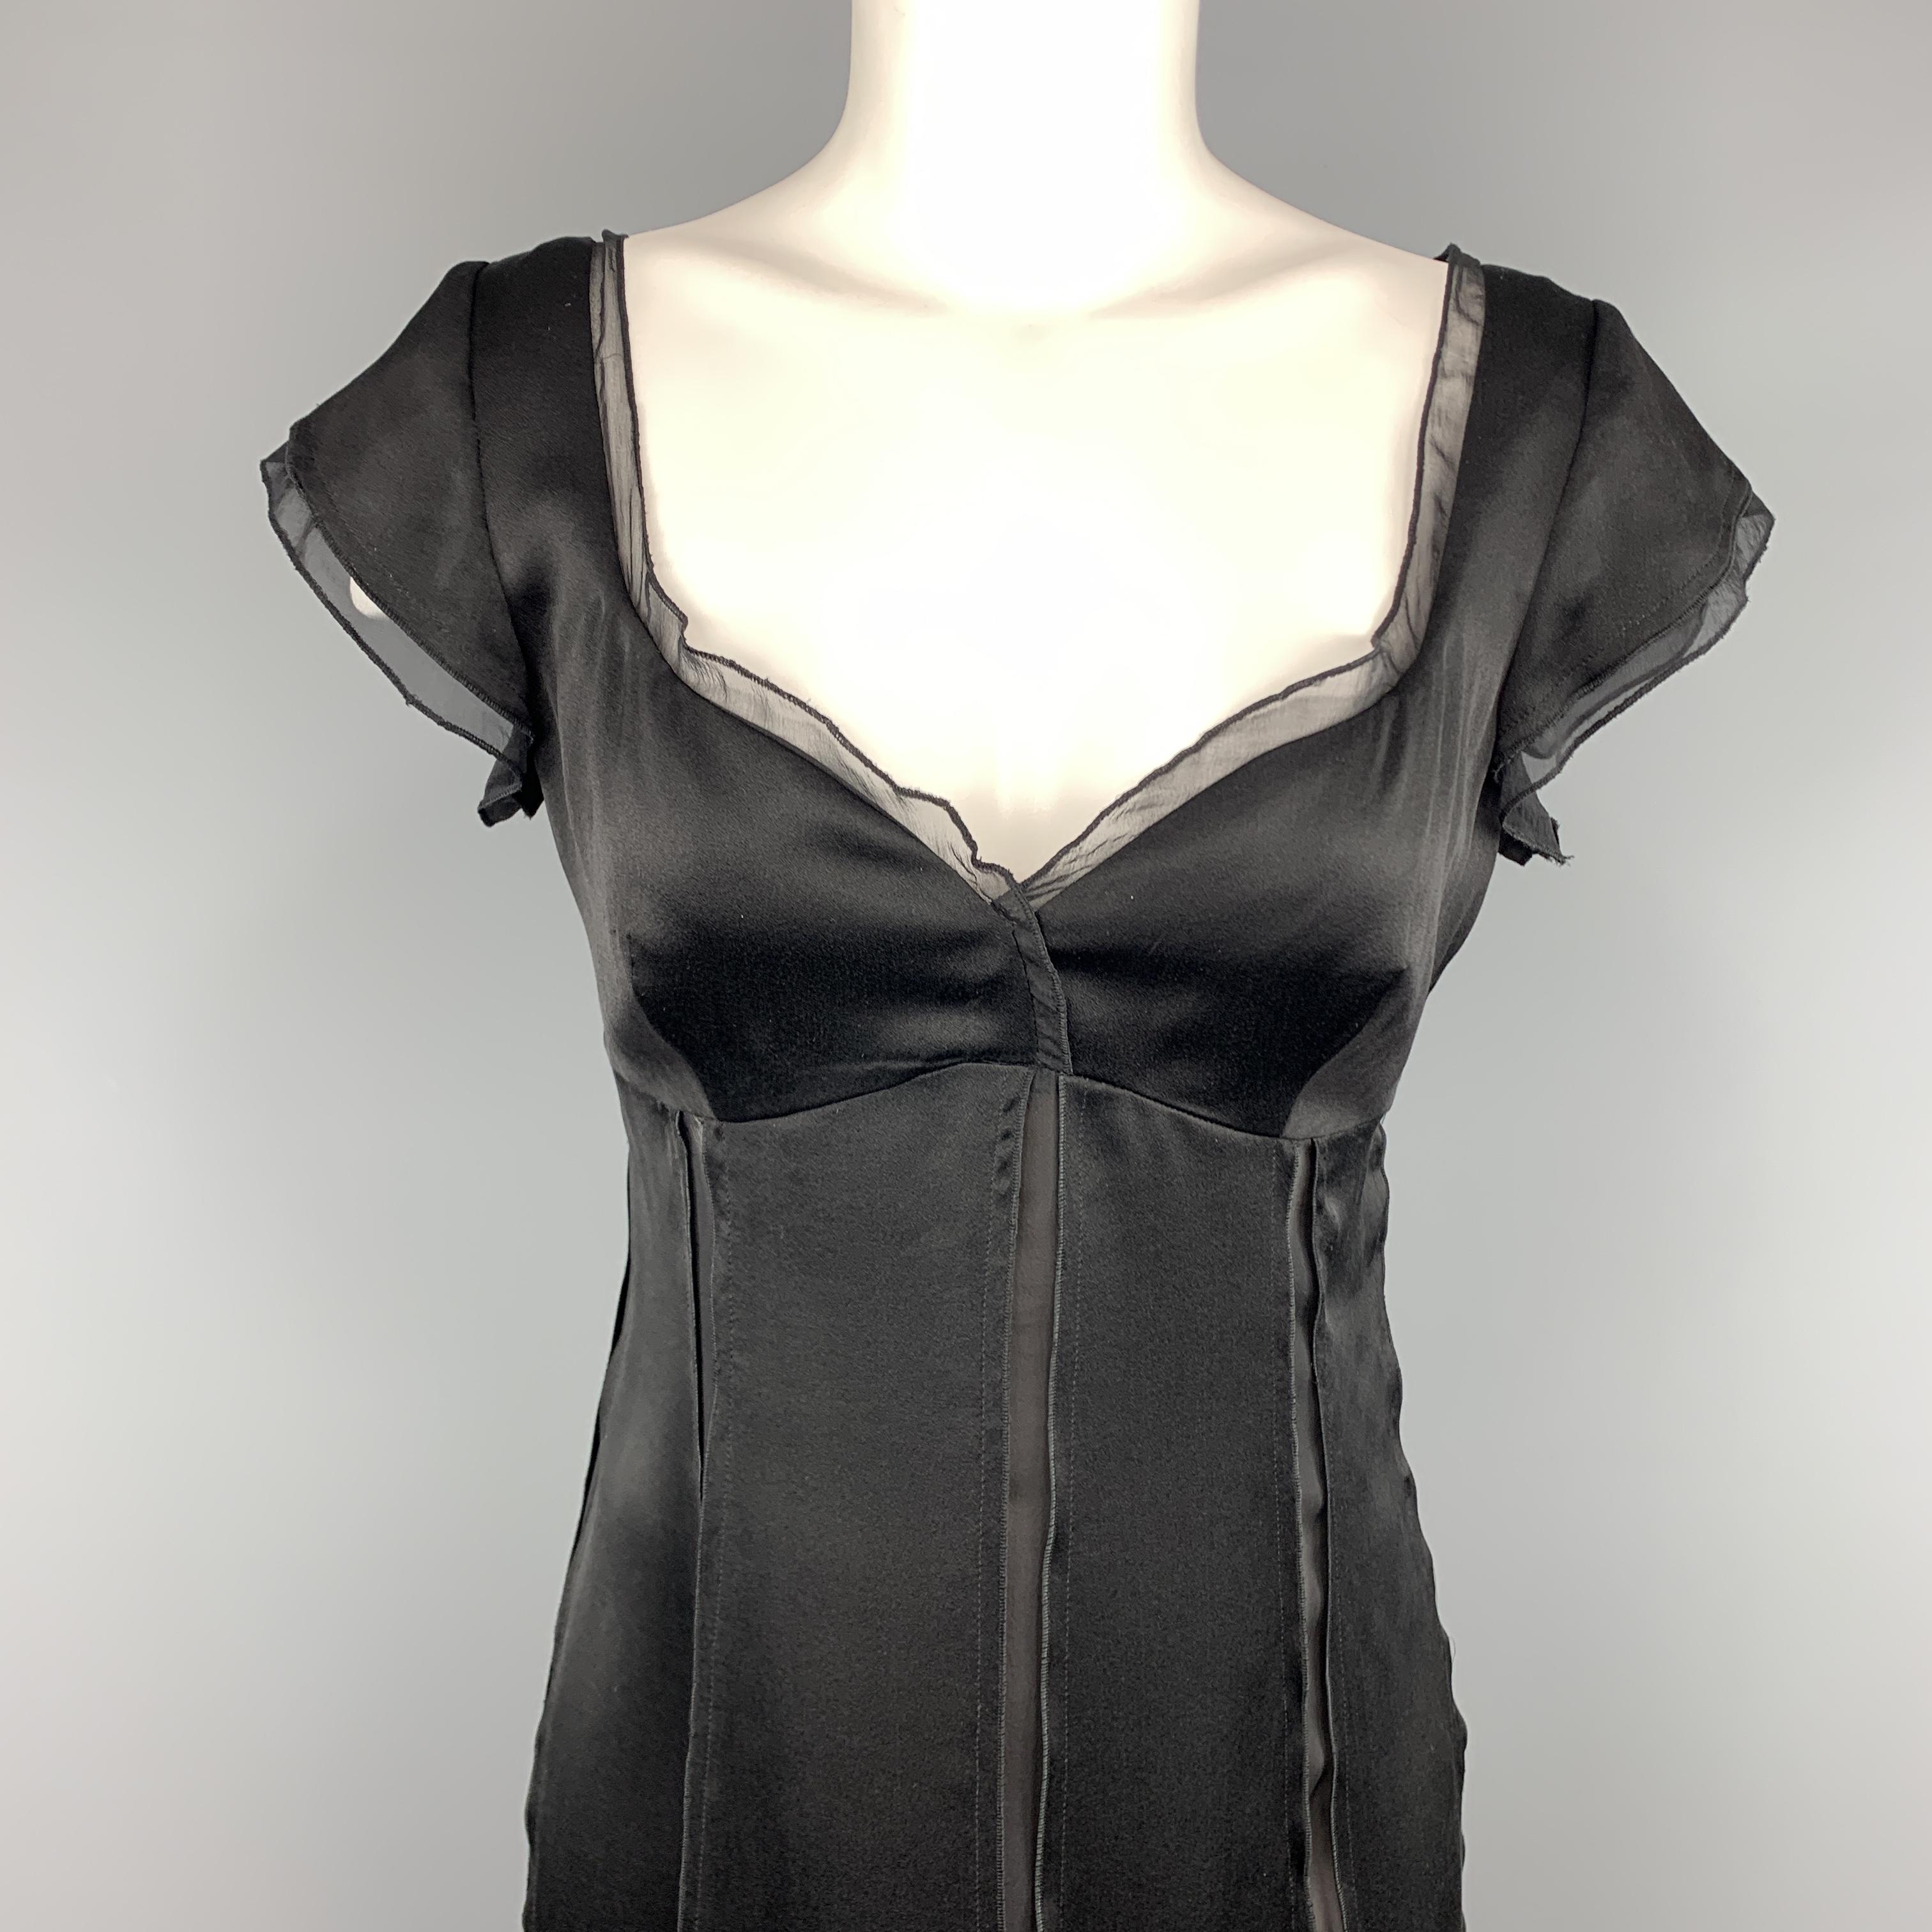 ALBERTA FERRETTI dress comes in black silk satin with a sweetheart neckline, cap sleeves, and sheer chiffon piping details. Made in Italy.
 
Excellent Pre-Owned Condition.
Marked: 6
 
Measurements:
 
Shoulder: 15 in.
Bust: 36 in.
Waist: 30 in.
Hip: